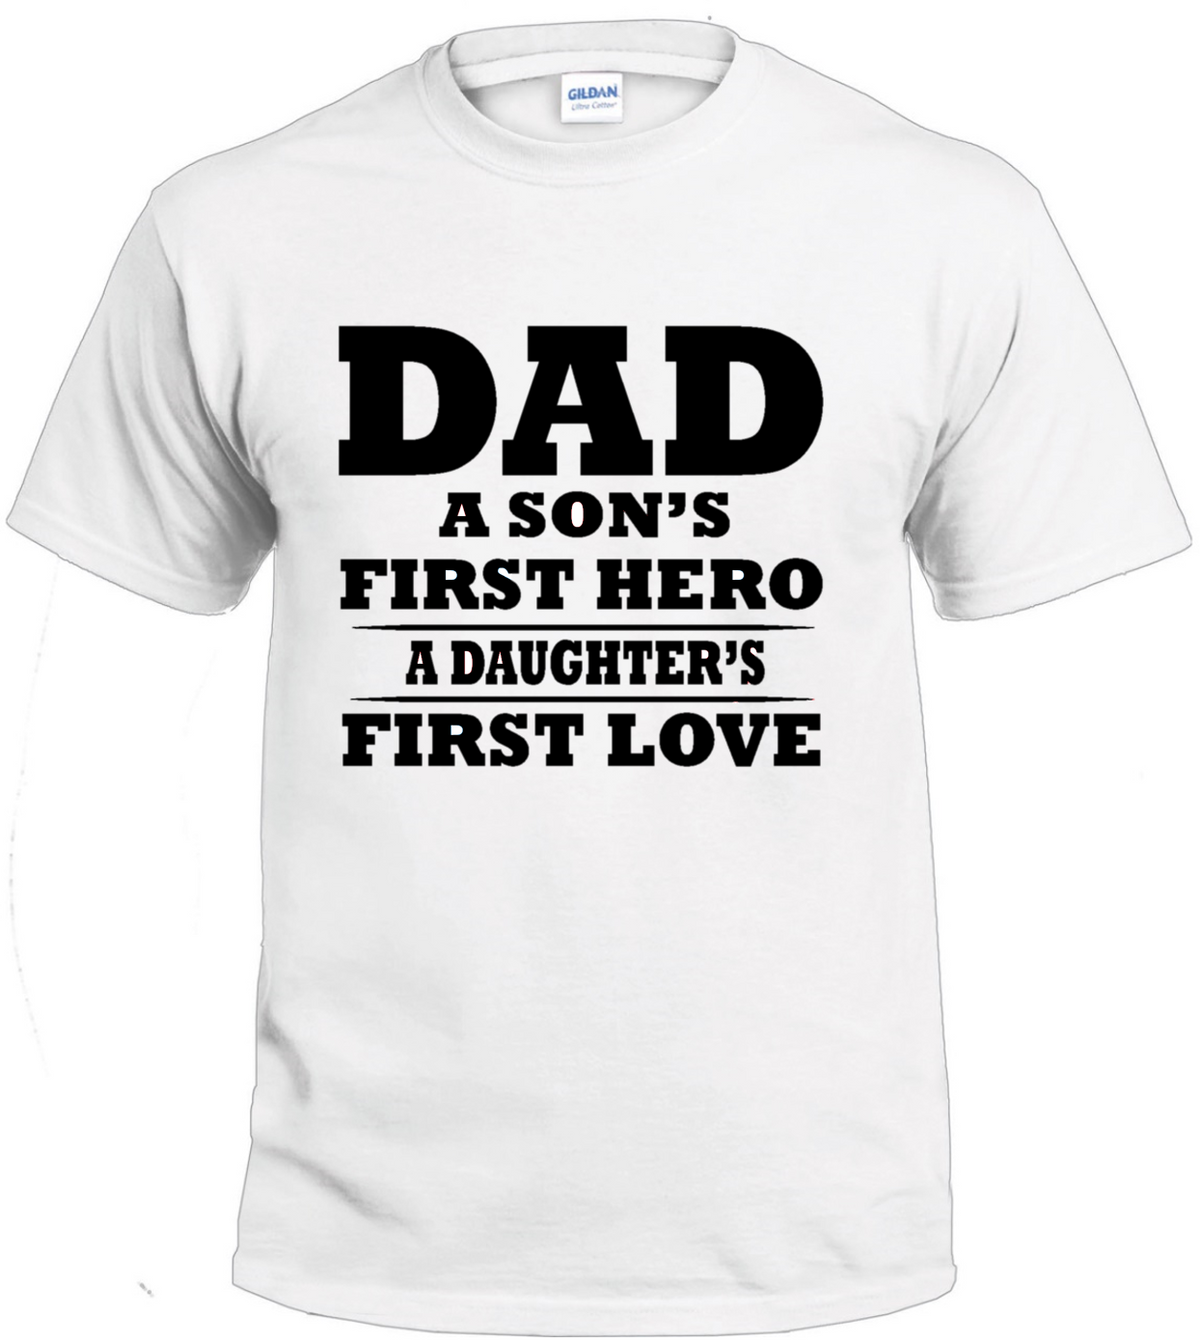 A Son's First Hero, A Daughter's First Love dad t-shirt